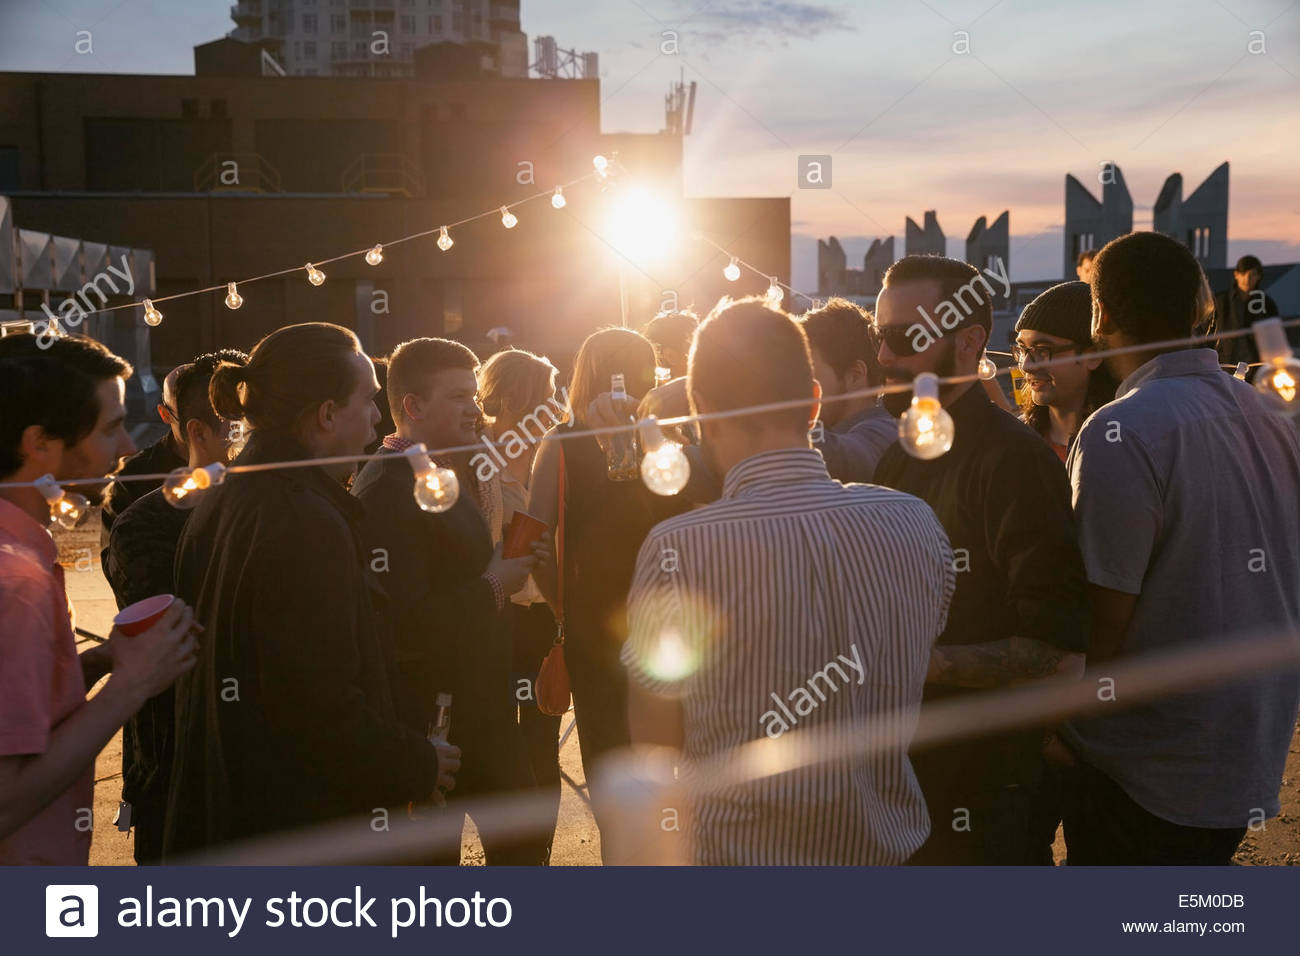 String lights over crowd at rooftop party Stock Photo